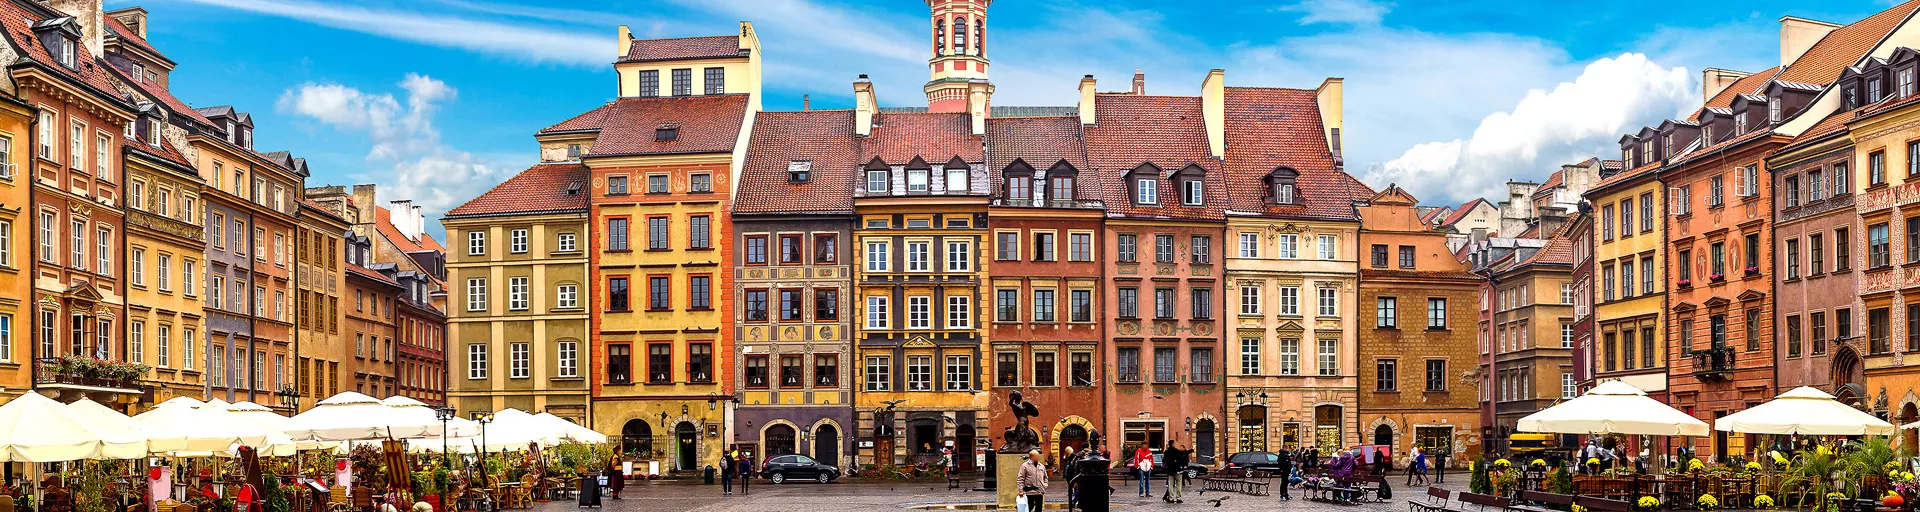 Poland Luxury Tours and Travel Guide